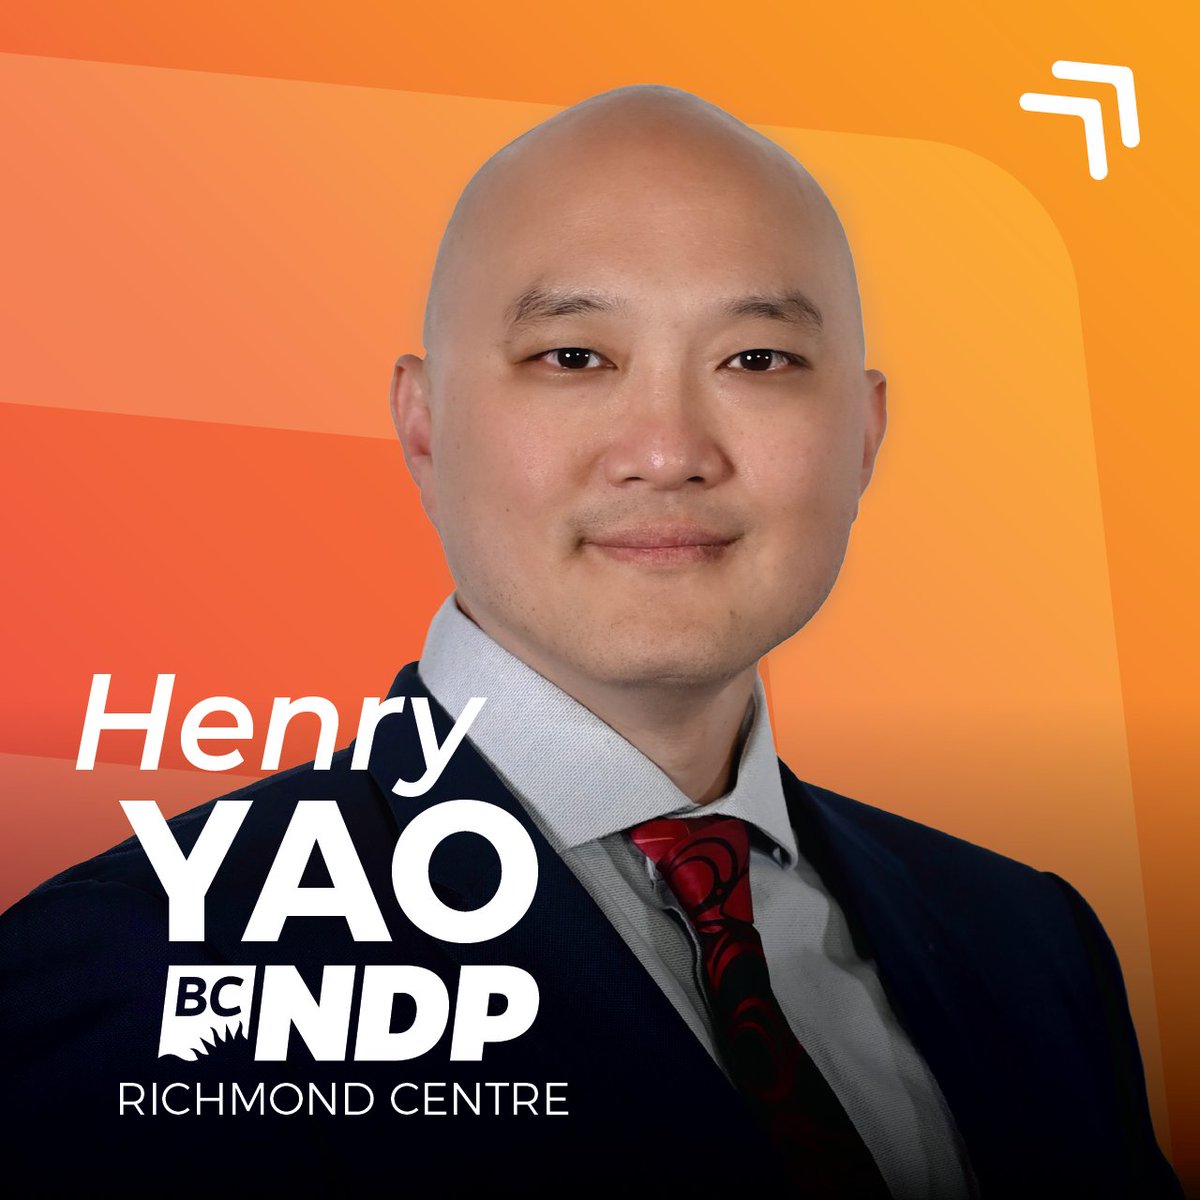 Henry Yao is our BC NDP candidate in Richmond Centre. Elected MLA for Richmond South Centre in 2020. Henry has deep roots in his community, working with the Richmond Chamber of Commerce and the Richmond Chinese Community Society. Congratulations, @henryyaomla!